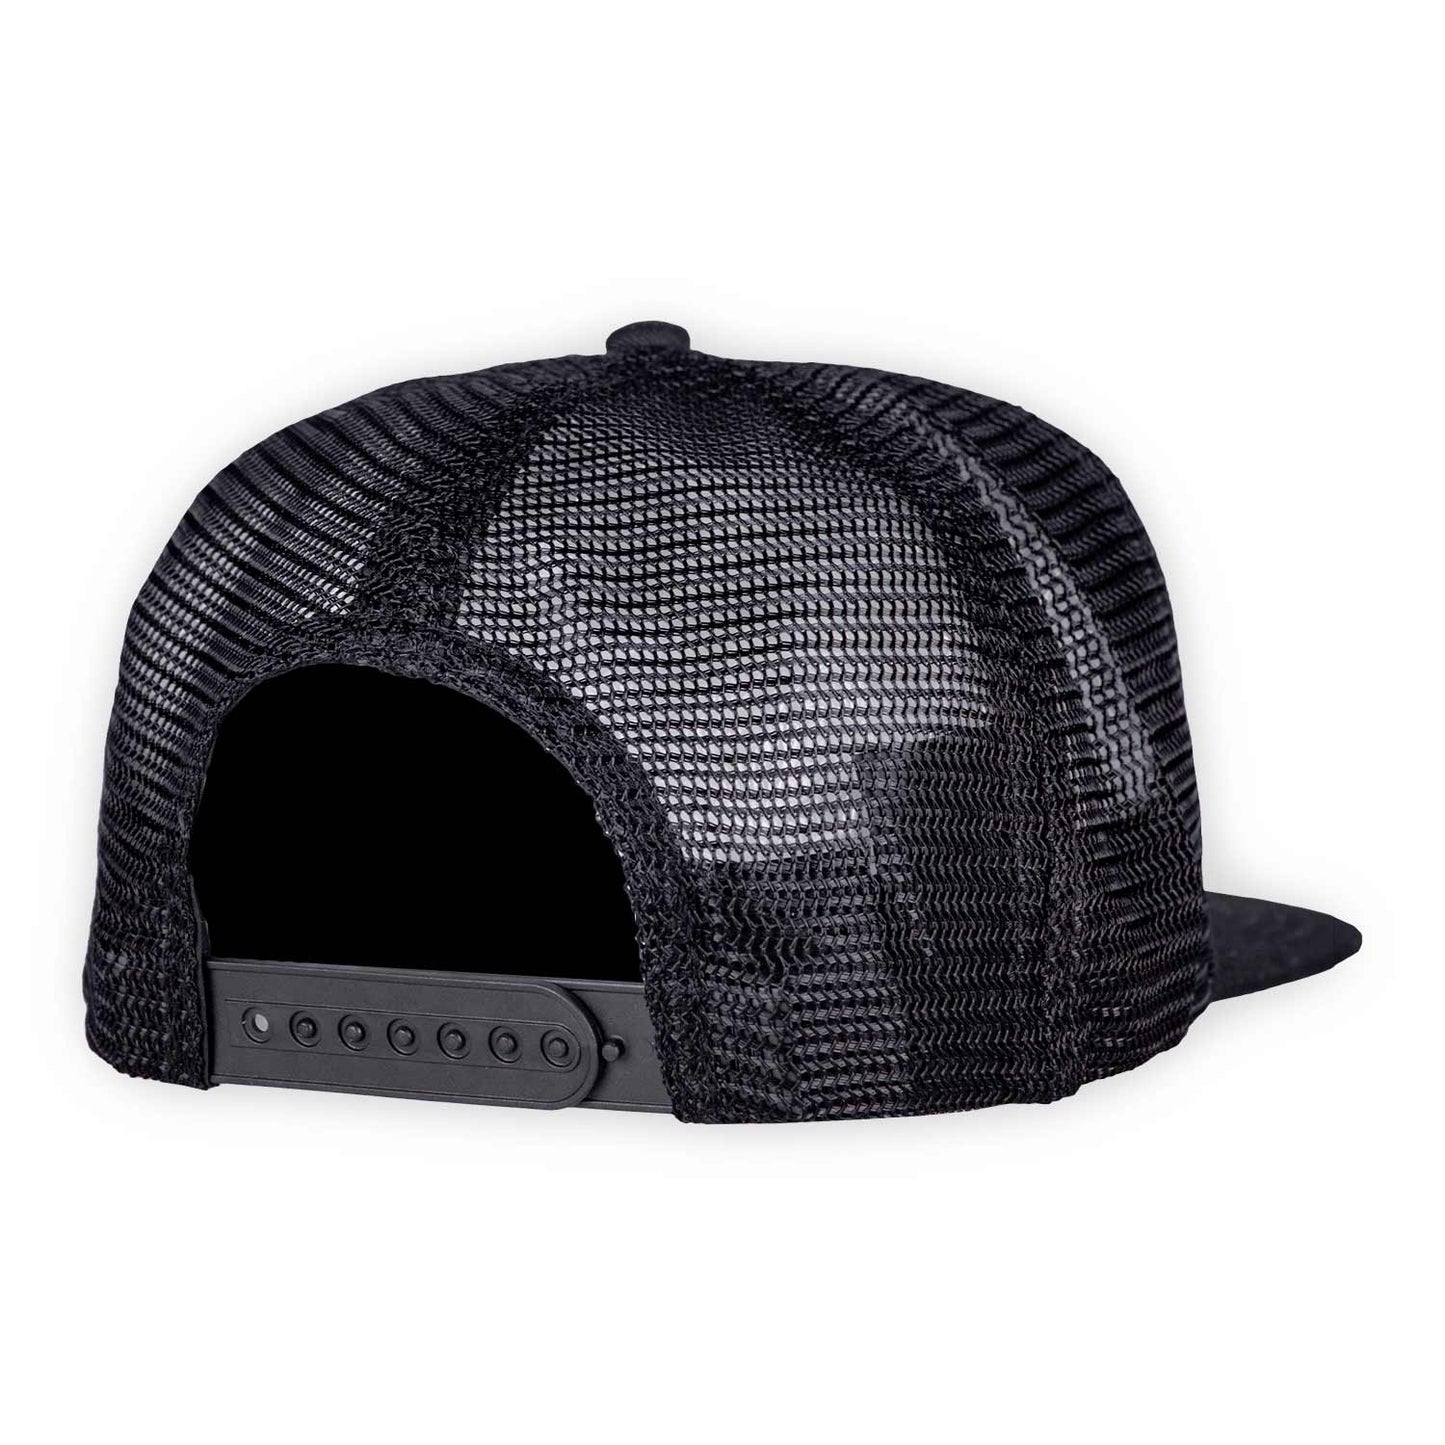 Carve Wicked X CSC 'King of Pigs' Trucker Cap (Black)